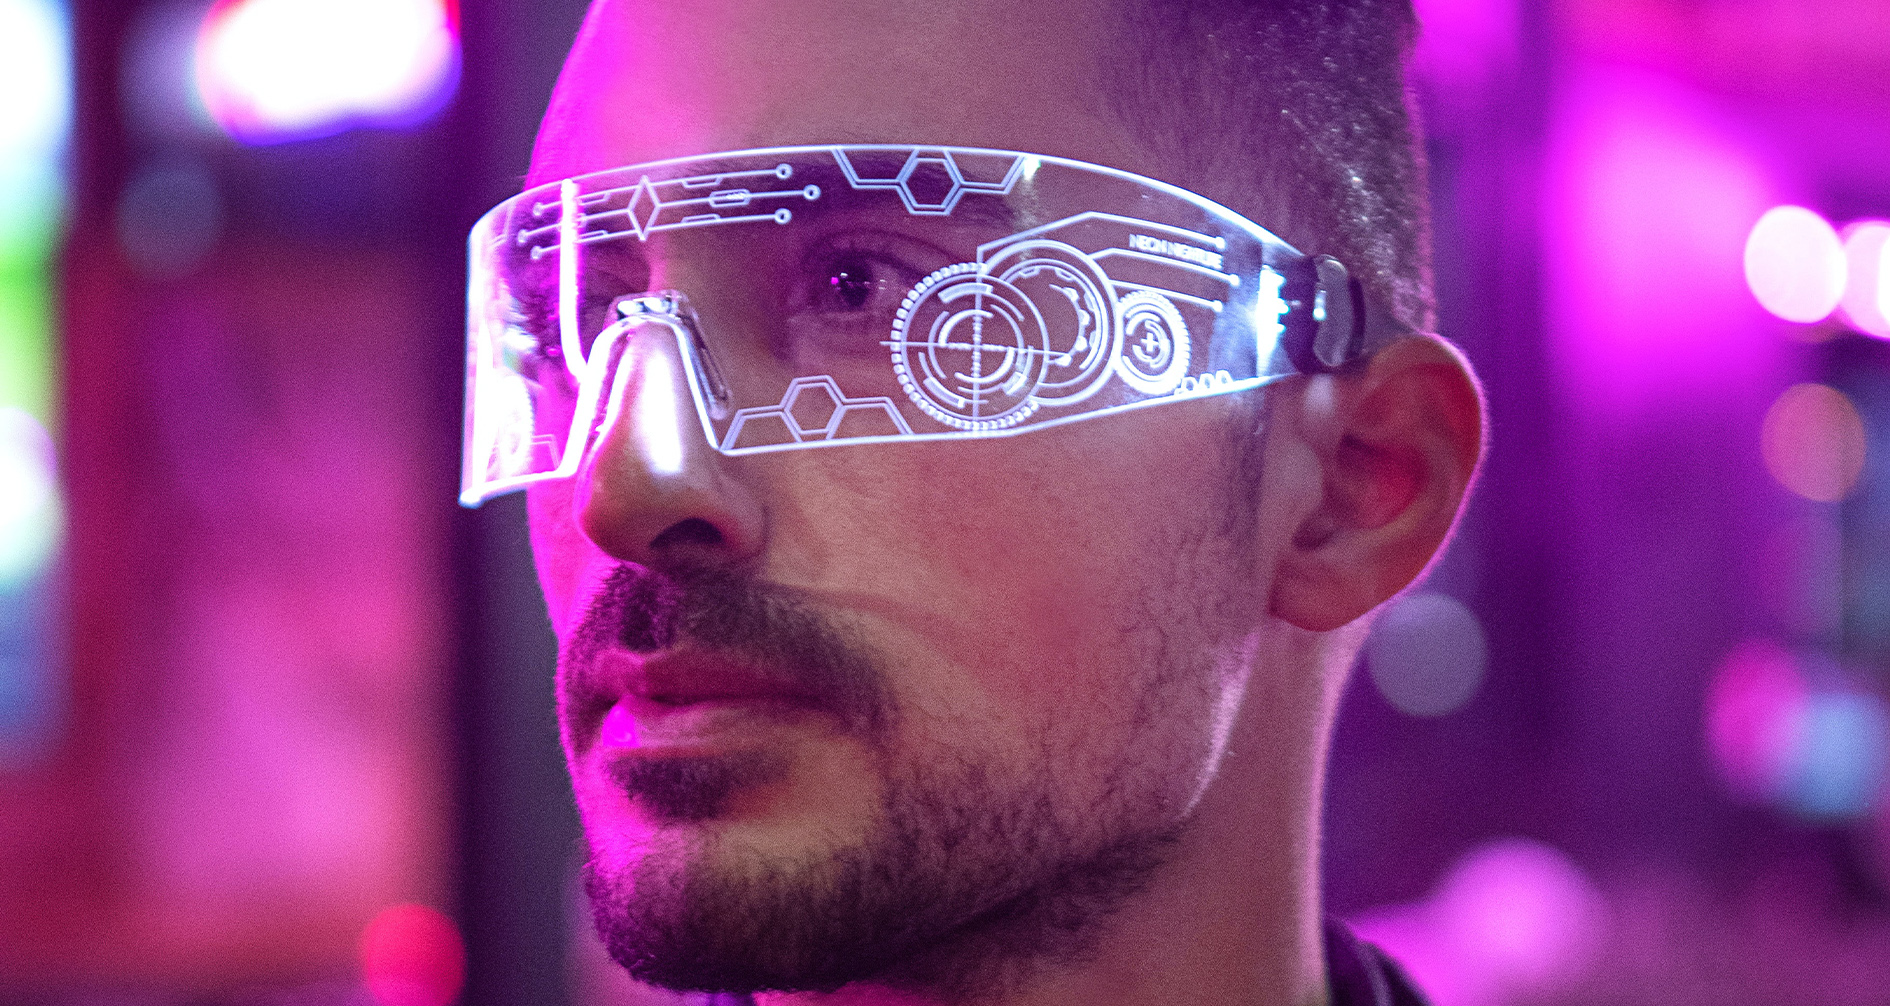 Futuristic looking augmented reality glasses